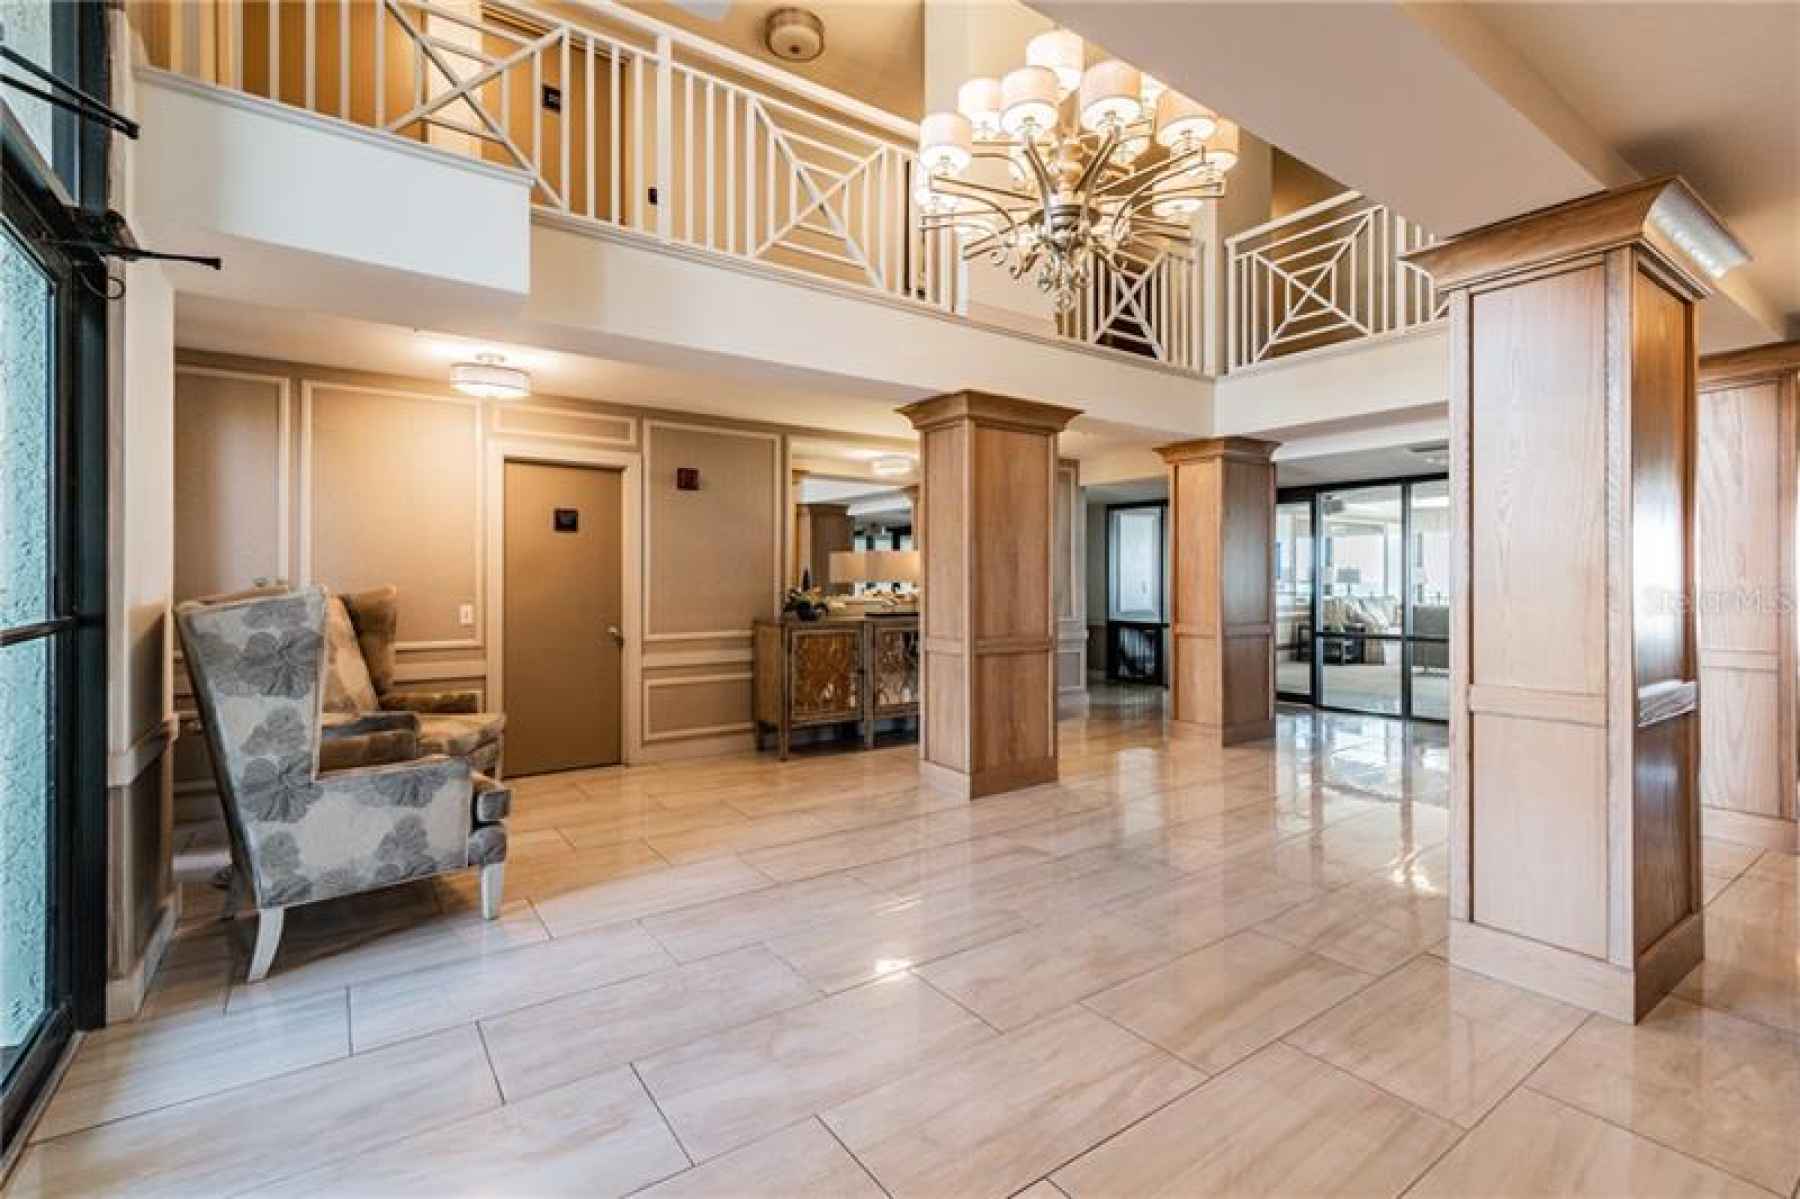 Entryway to elevators, amenities and outdoor pool area